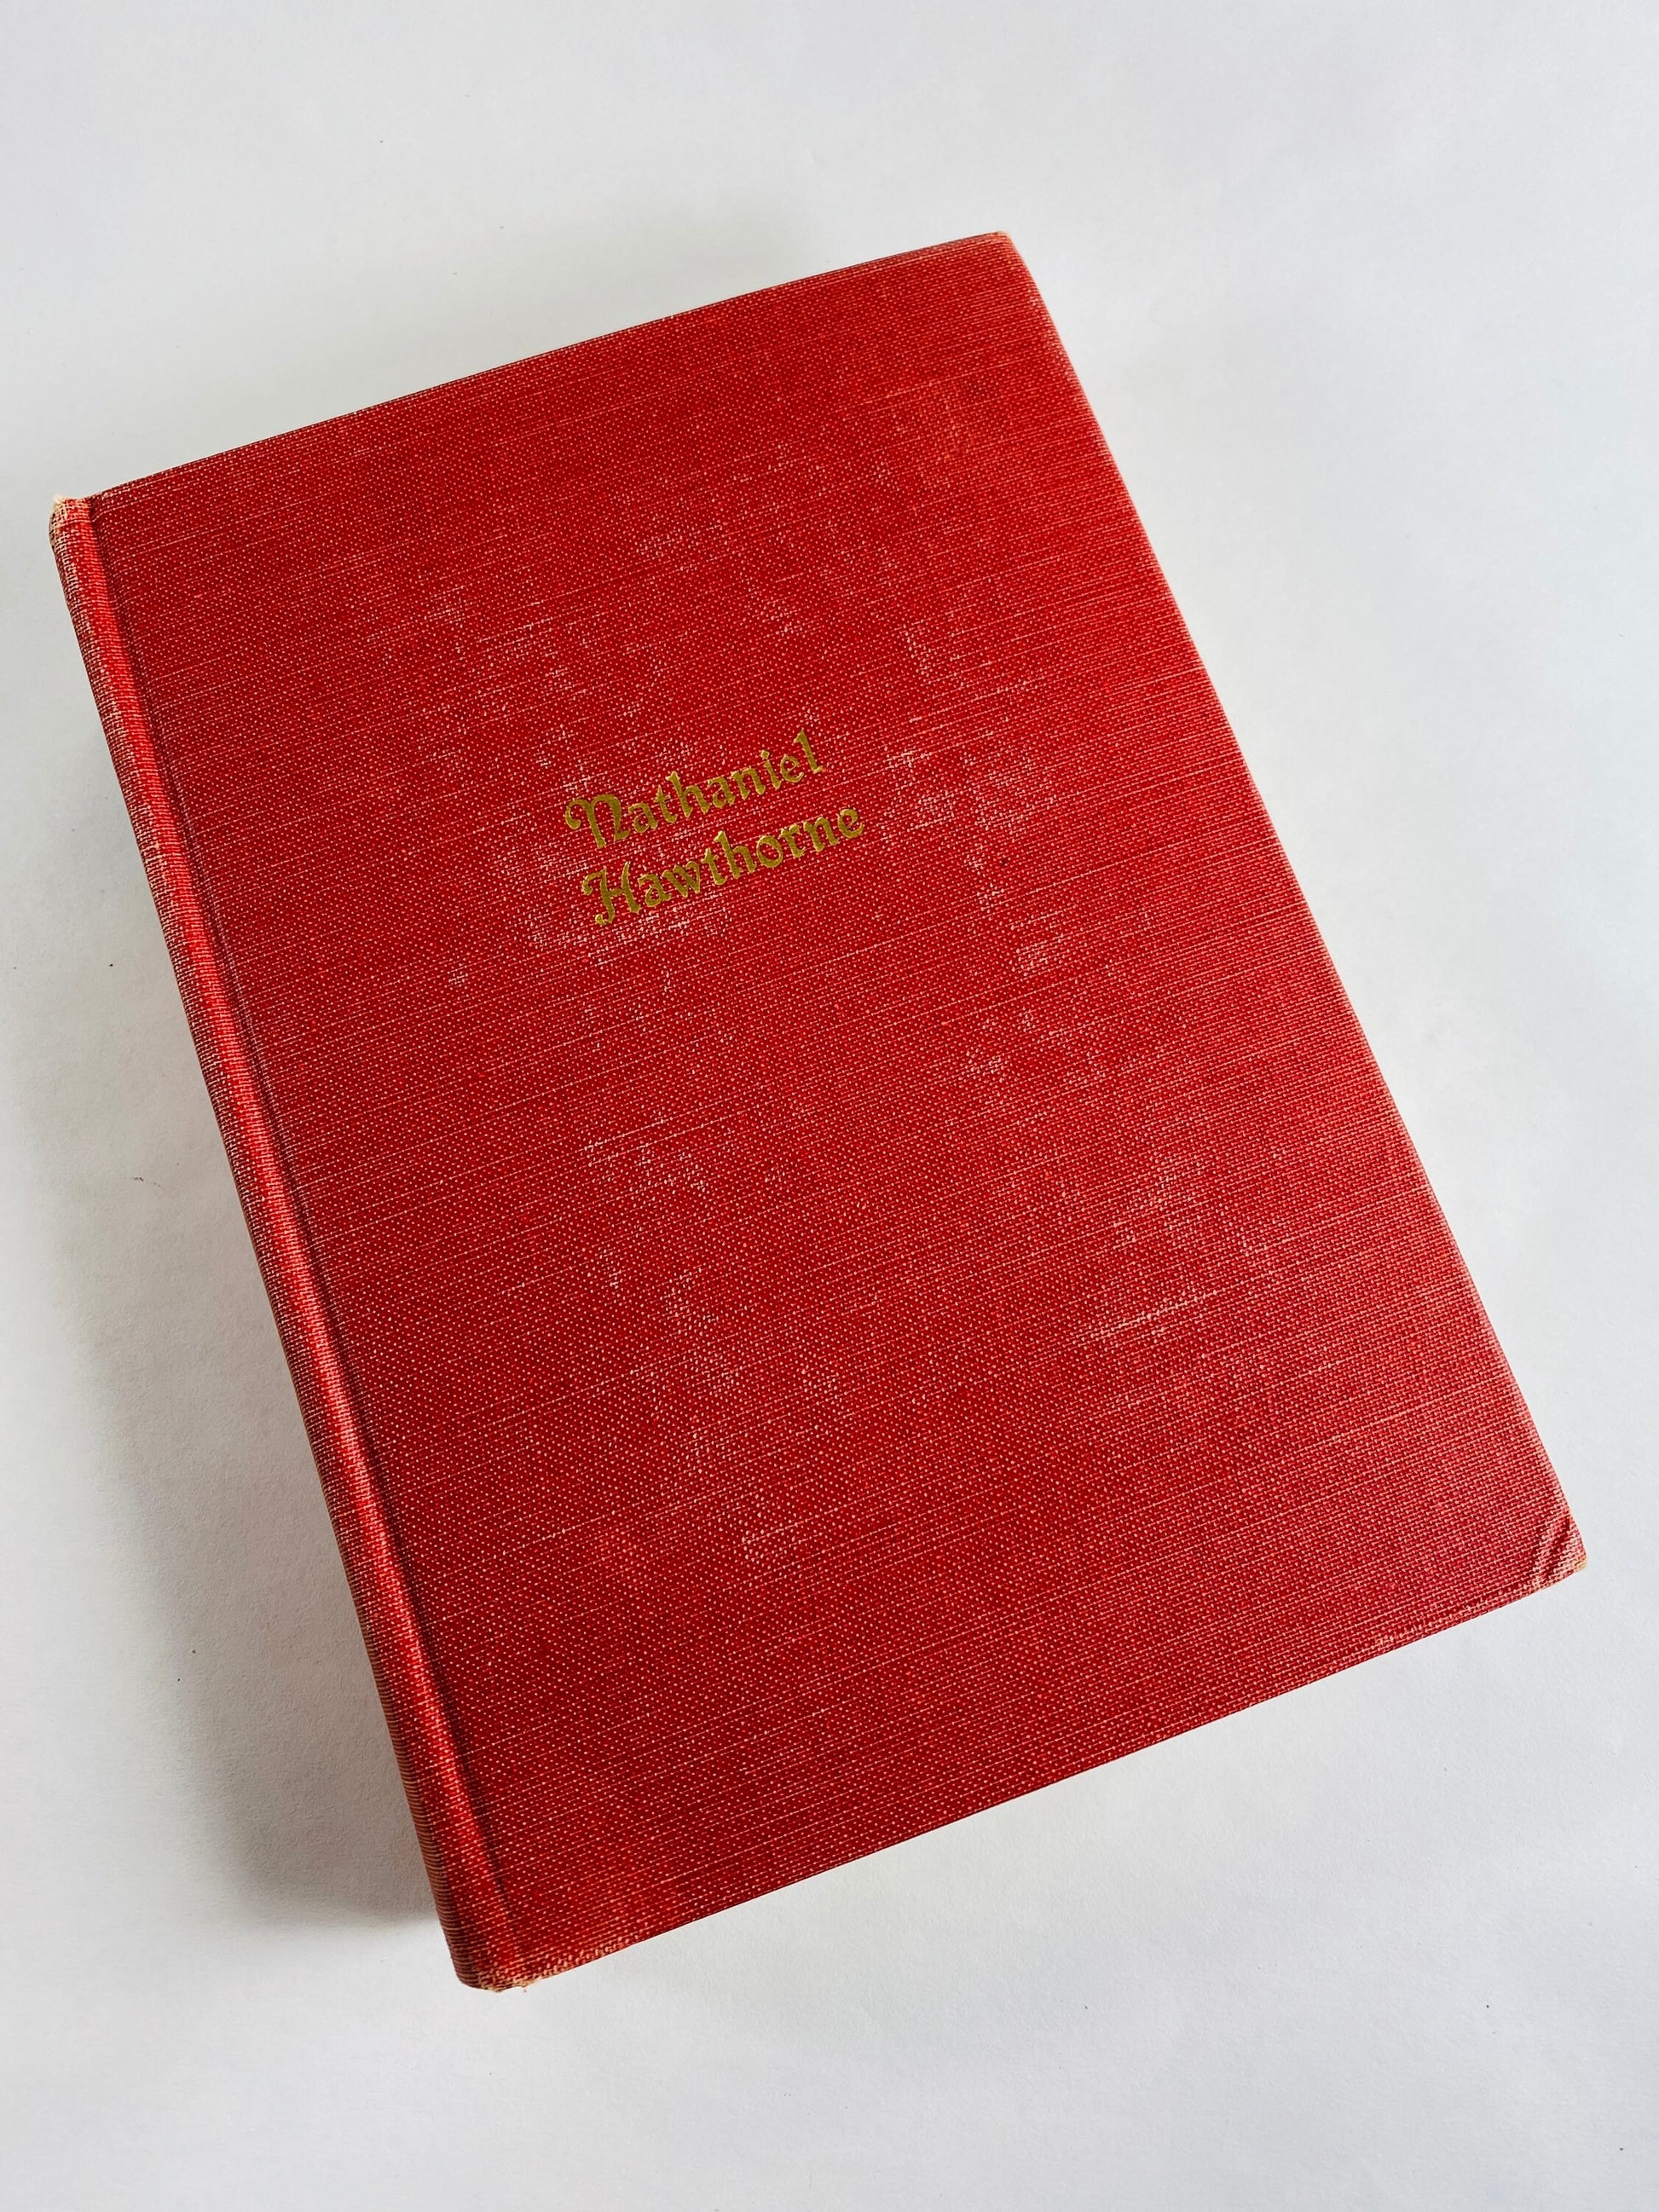 1958 Nathaniel Hawthorne works Scarlett Letter Vintage book Story of human alienation and its effect on the soul. Red home decor